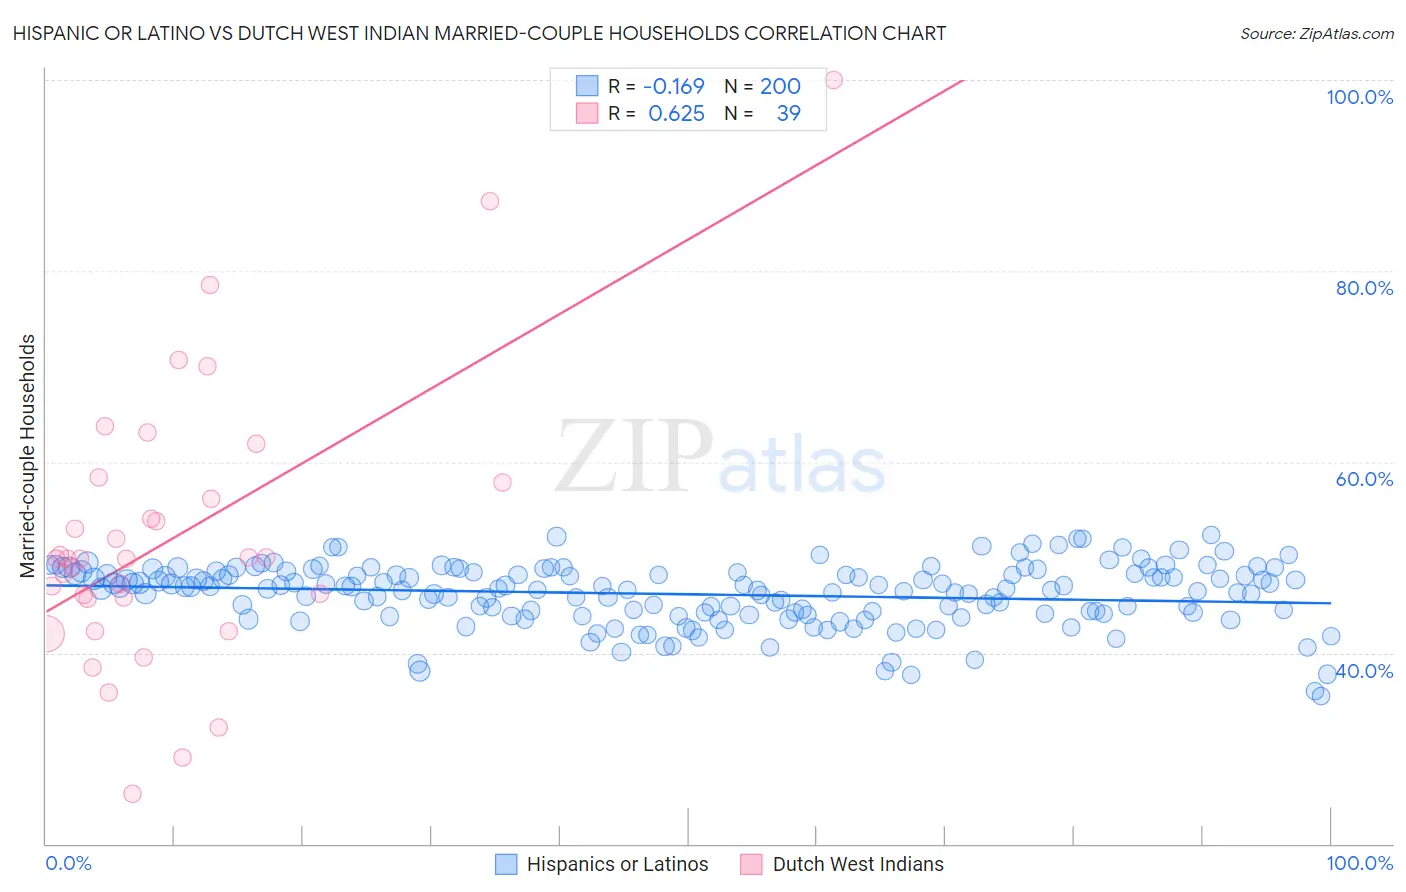 Hispanic or Latino vs Dutch West Indian Married-couple Households